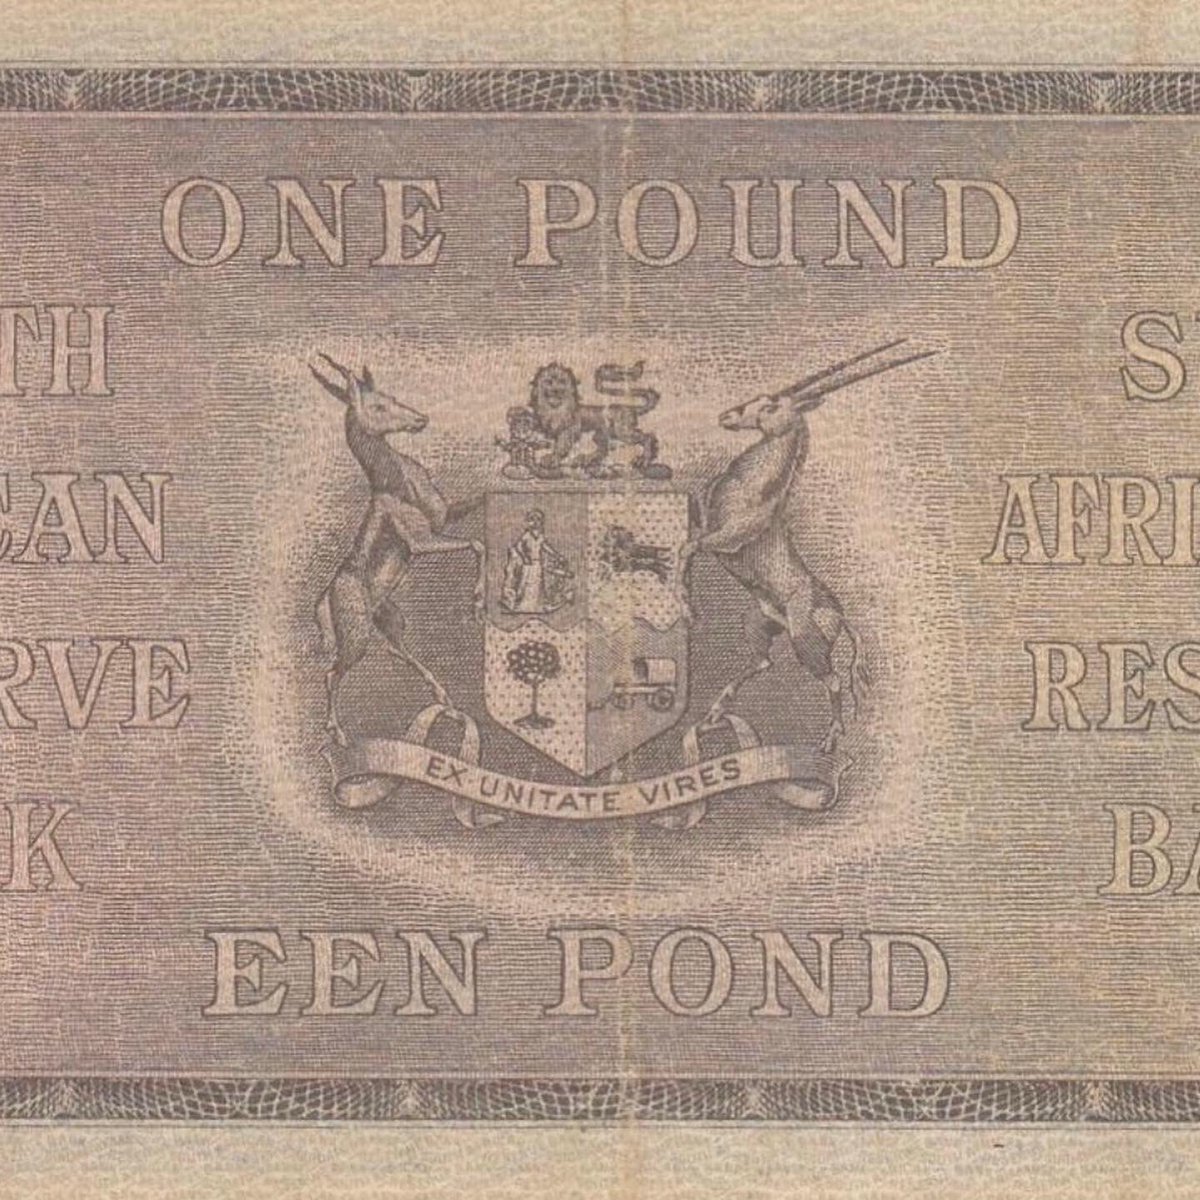 Sudafrica, 1 Pound, 1946.

#sudafrica #ciudaddelcabo #rsa #southafrica #collection #banknotes #currency #pound #suidafrikaans